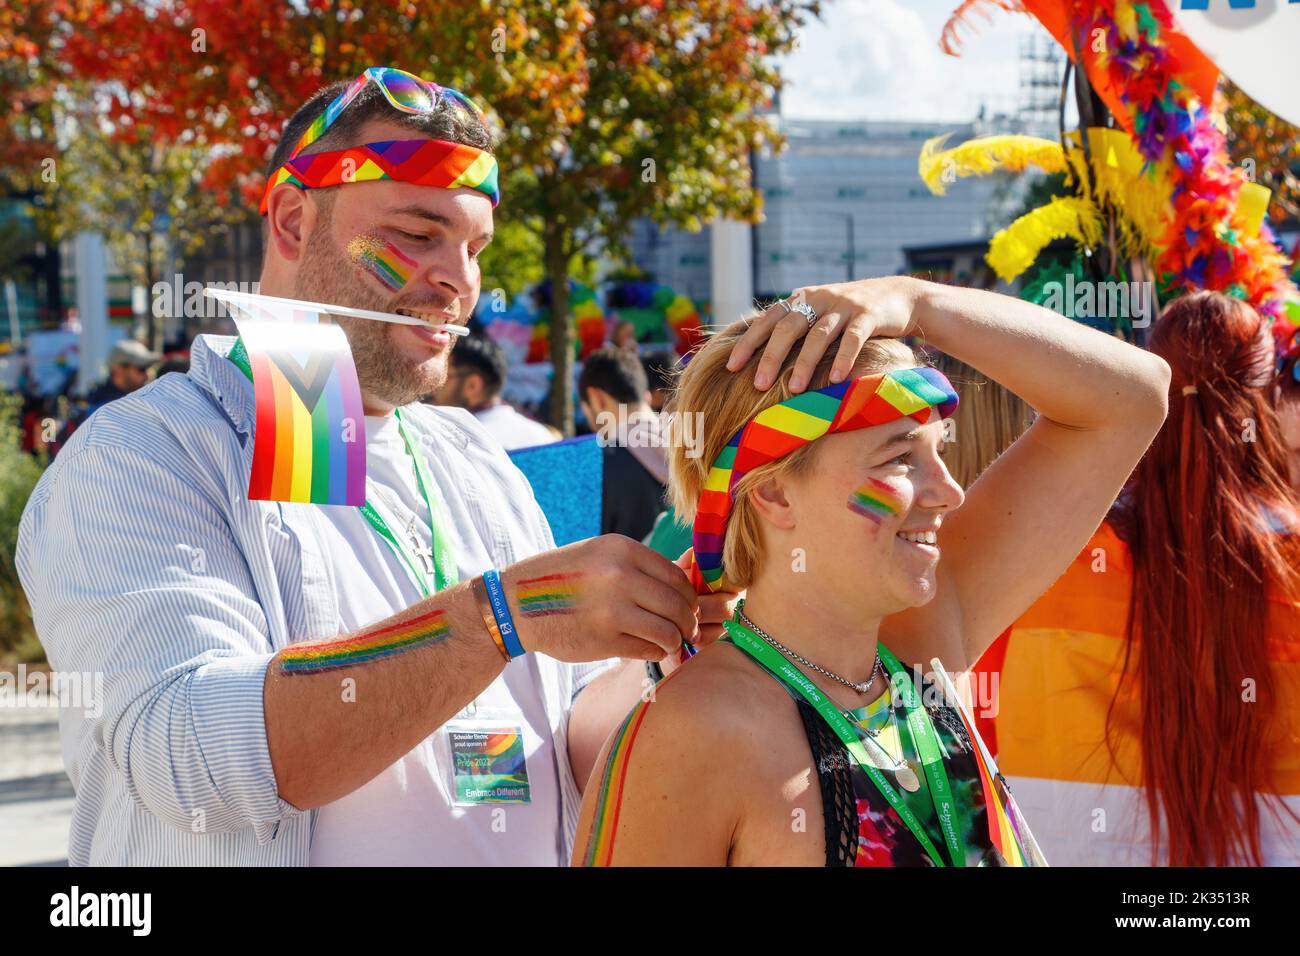 man adjusts rainbow accessories and headbands on woman at Gay Pride parade protest 2022 in birmingham city centre uk september 24th Stock Photo